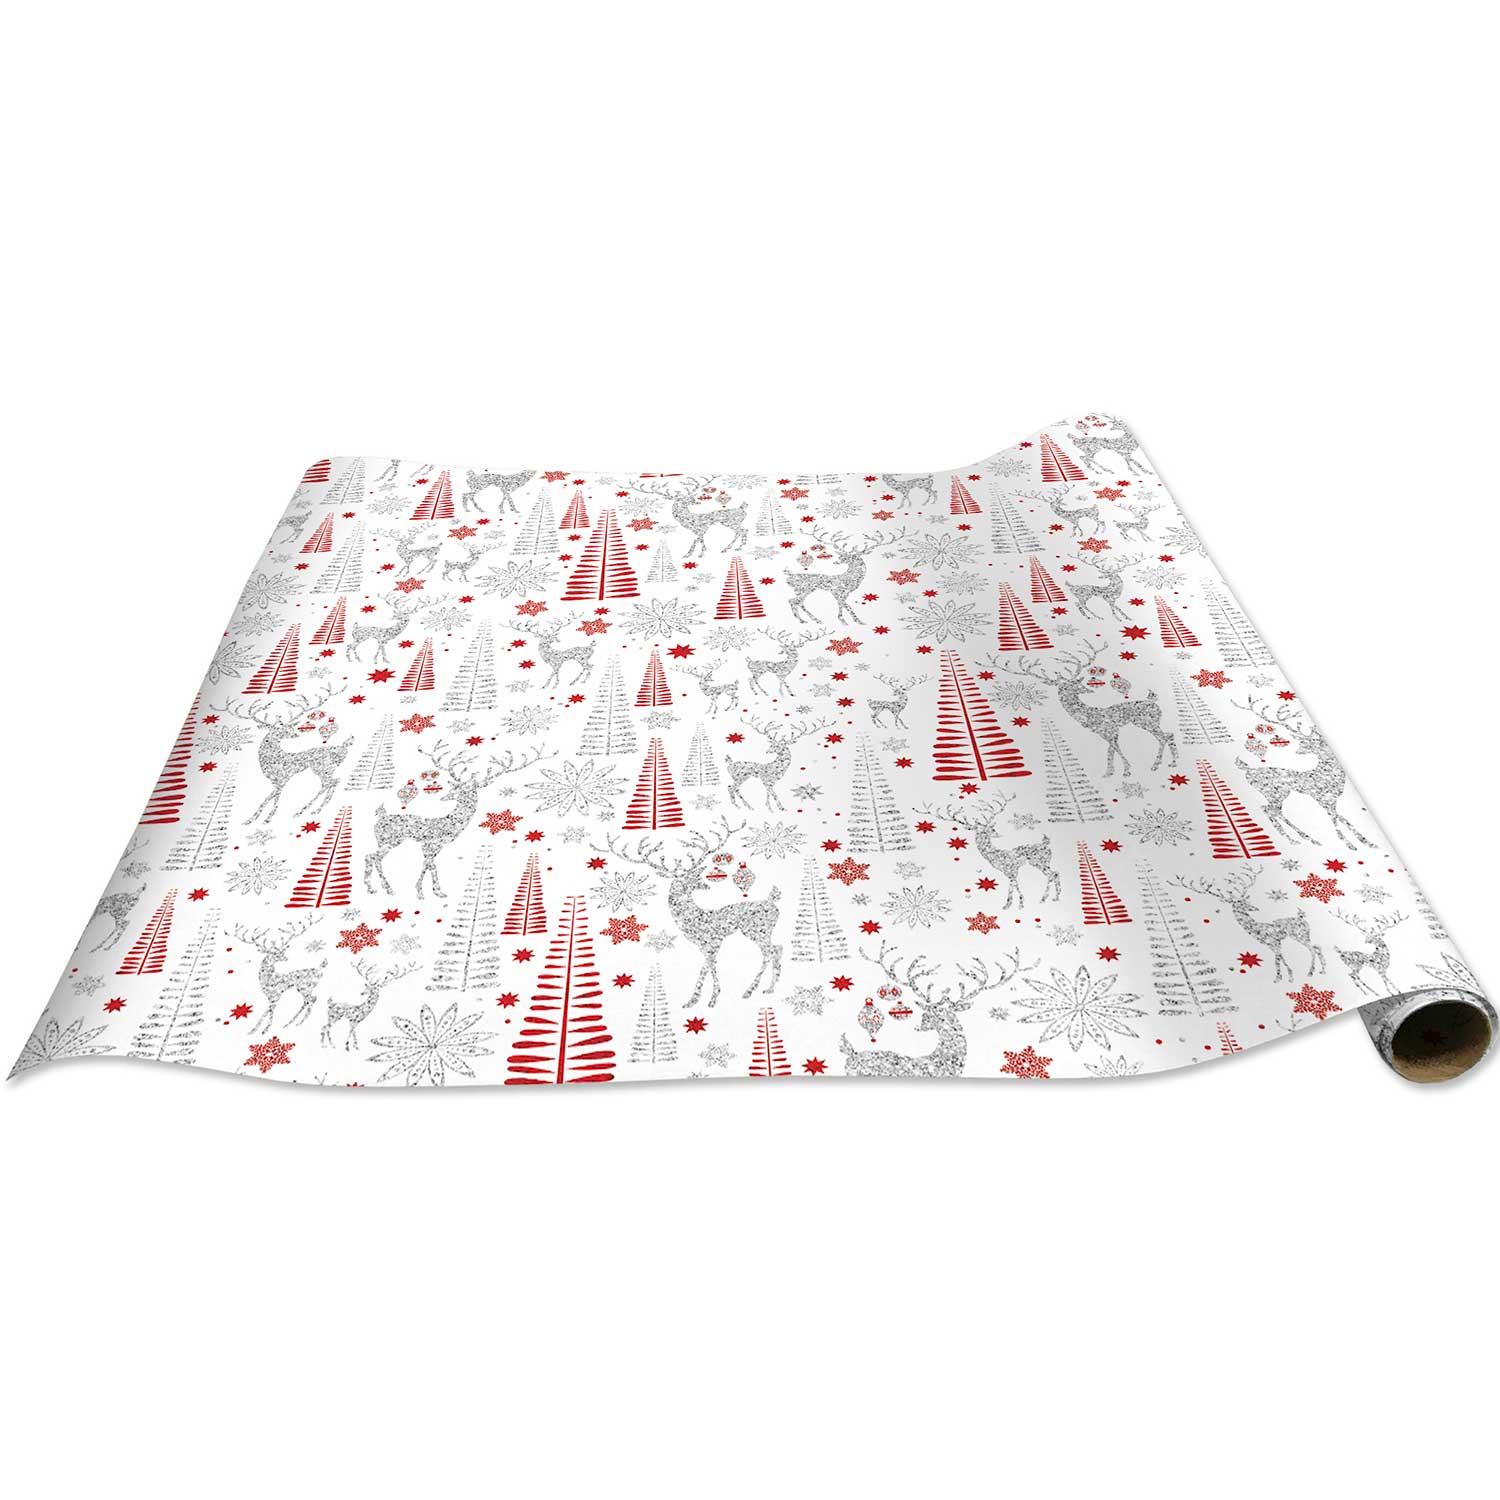 Holographic Reindeer Christmas Gift Wrap Full Ream 833 ft x 24 in